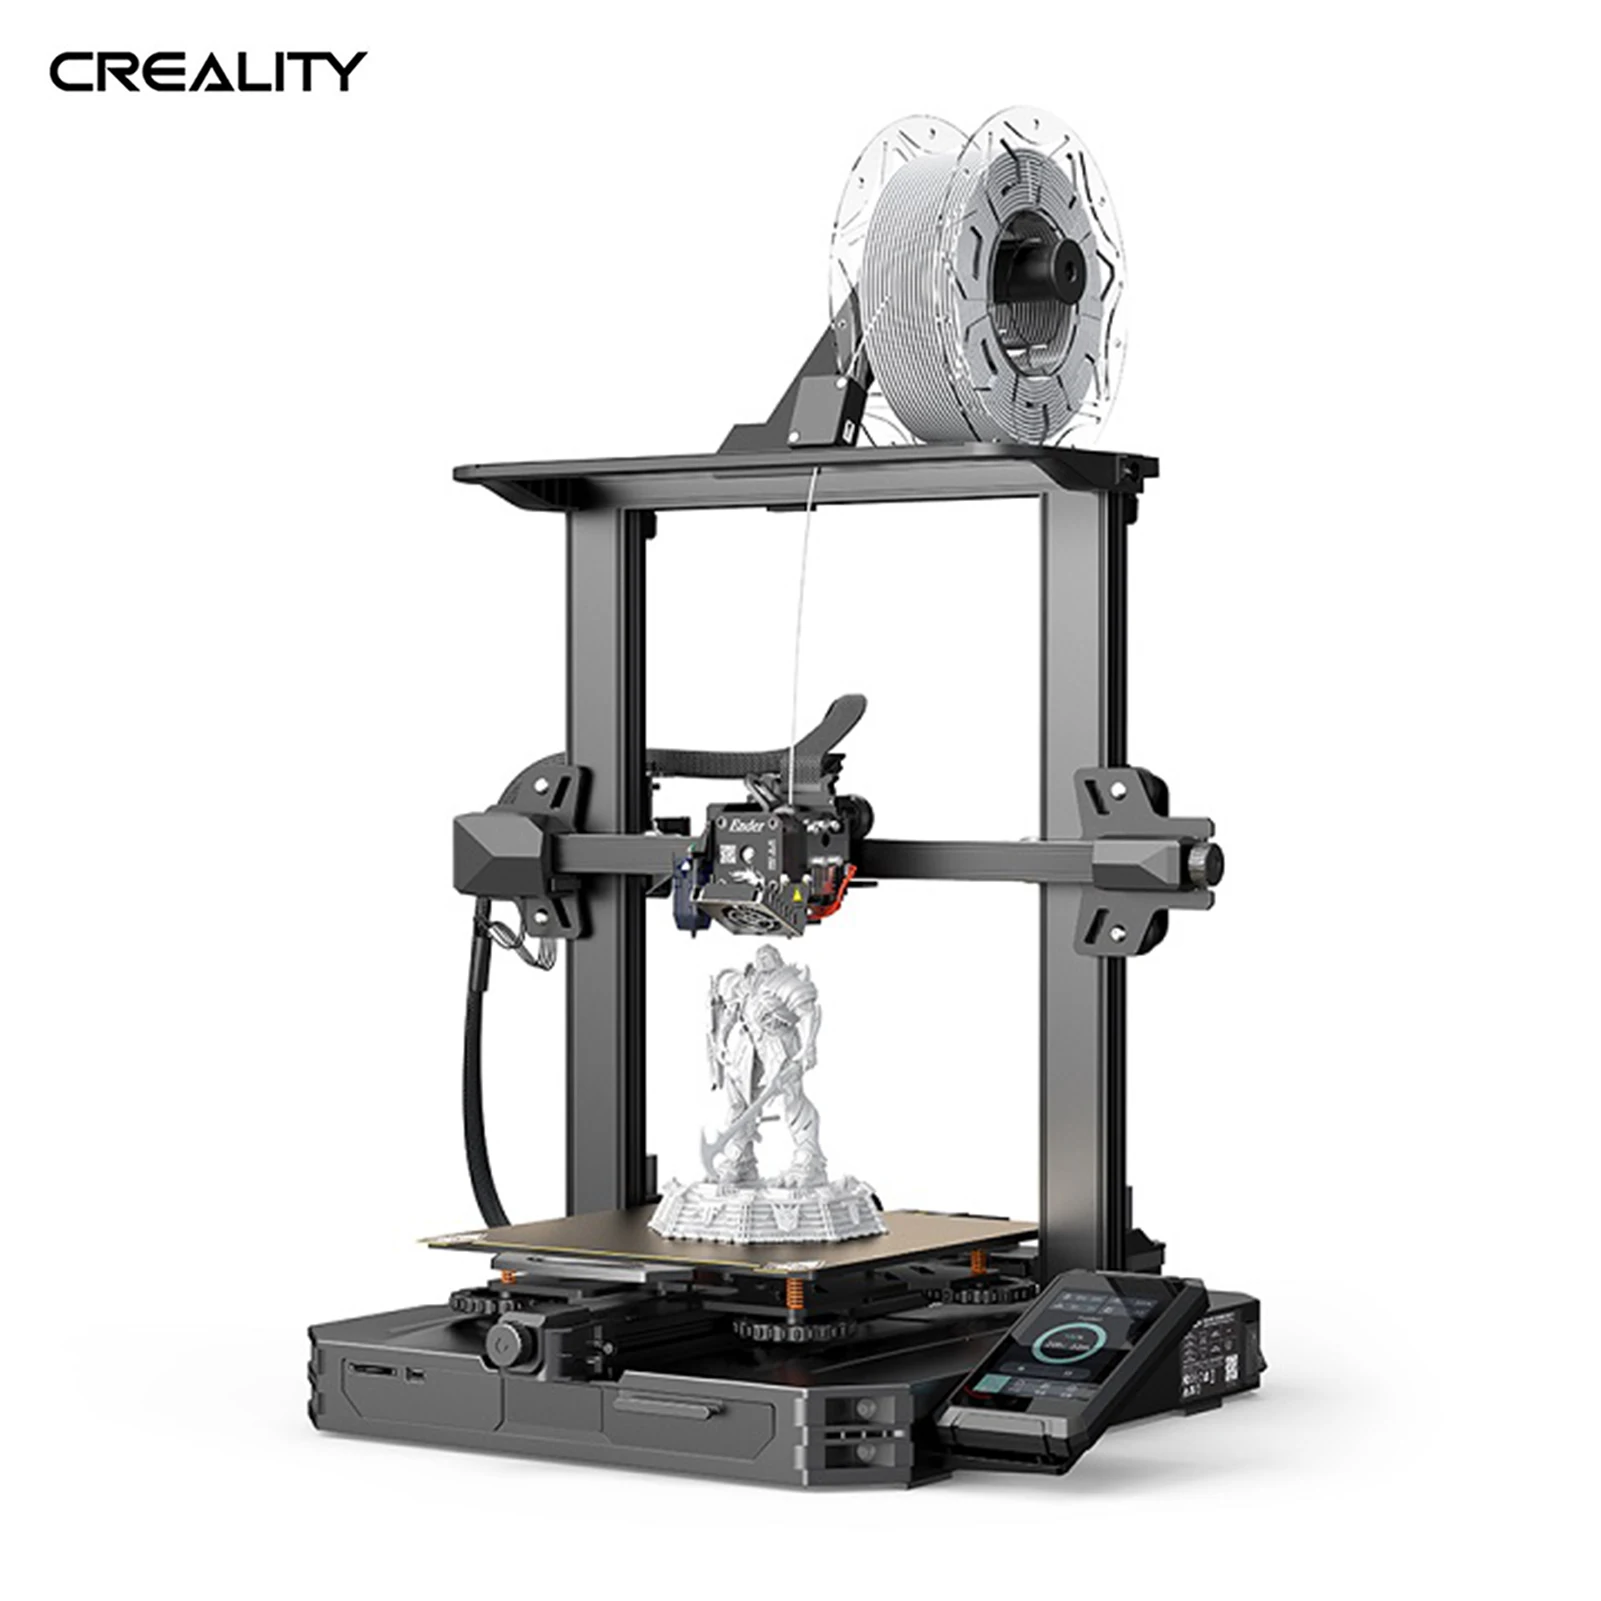 large 3d printer Original CREALITY Ender-3 S1 Pro 3D Printer CR Touch Automatic Levelling High-performance Printer With 220*220*270mm Print Size 3d laser printer